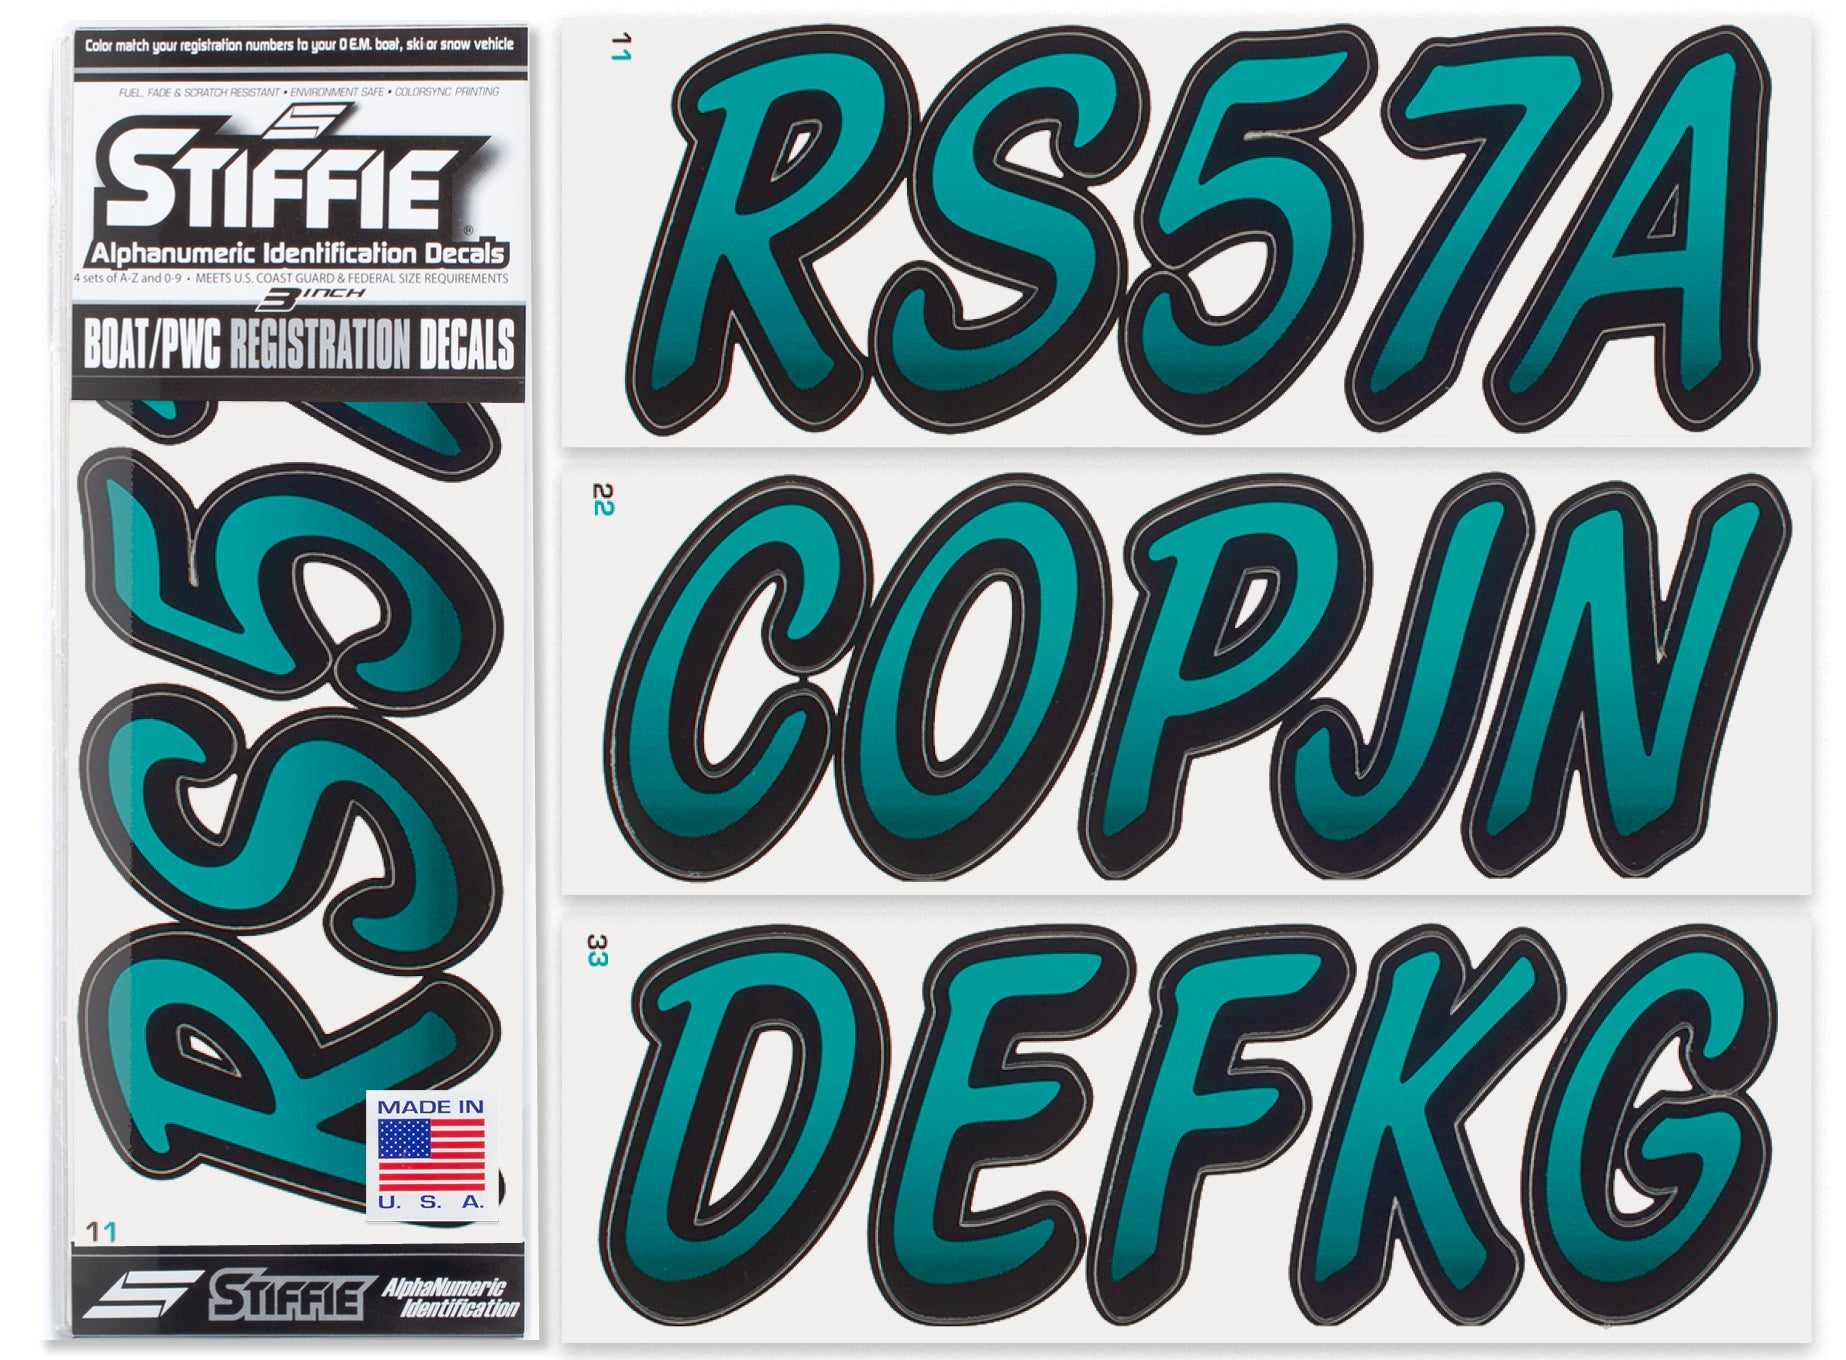 STIFFIE Whipline Aqua / Black 3" Alpha-Numeric Registration Identification Numbers Stickers Decals for Boats & Personal Watercraft…